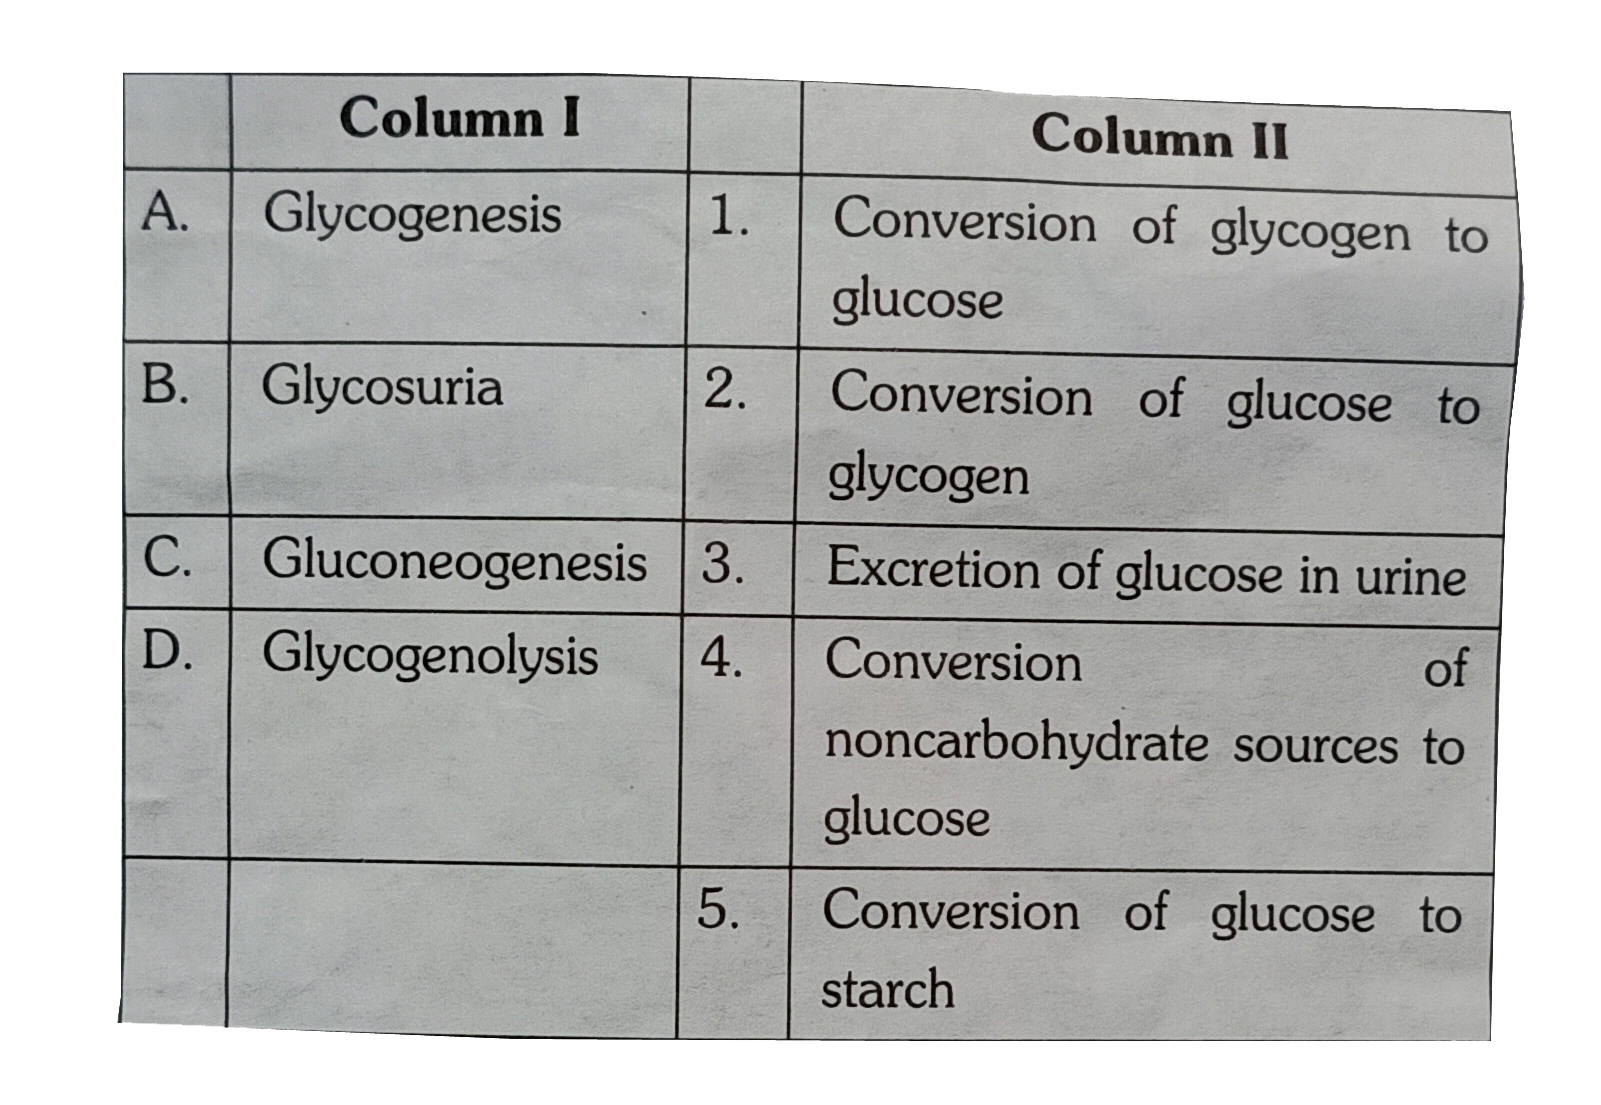 Column  I contains some terms and Colmun II contains their meanings. Match them properly  and choose the right answer